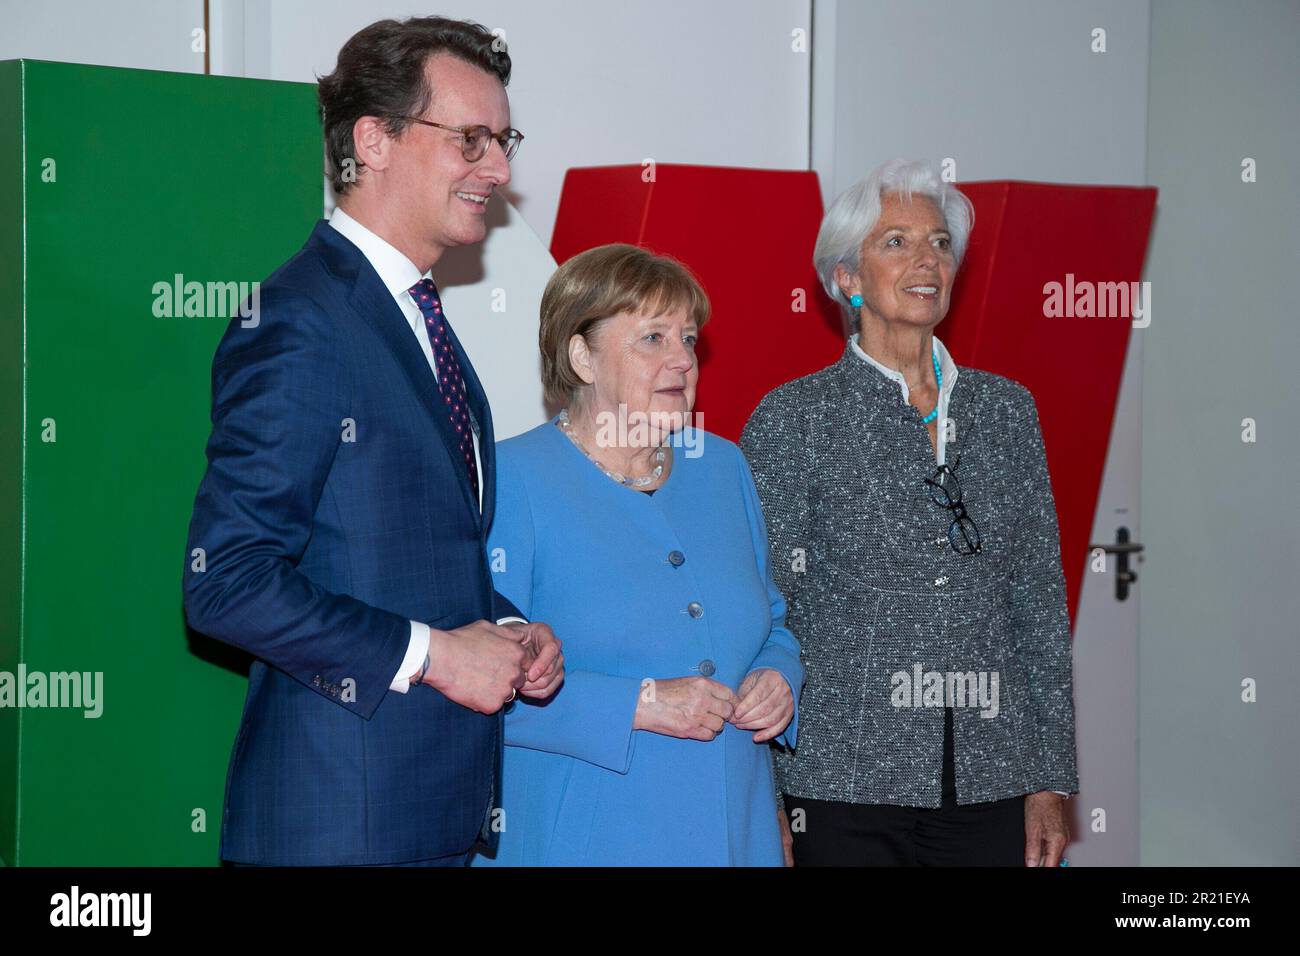 Cologne, Deutschland. 16th May, 2023. From left to right: Christine Lagarde (President of the European Central Bank), Dr. Angela Merkel (former Chancellor), Hendrik Wuest (Prime Minister North Rhine-Westphalia)Koeln, presentation of the State Prize of the State of North Rhine-Westphalia to former Chancellor Dr. Angela Merkel, May 16, 2023, Flora Cologne. Credit: dpa/Alamy Live News Stock Photo